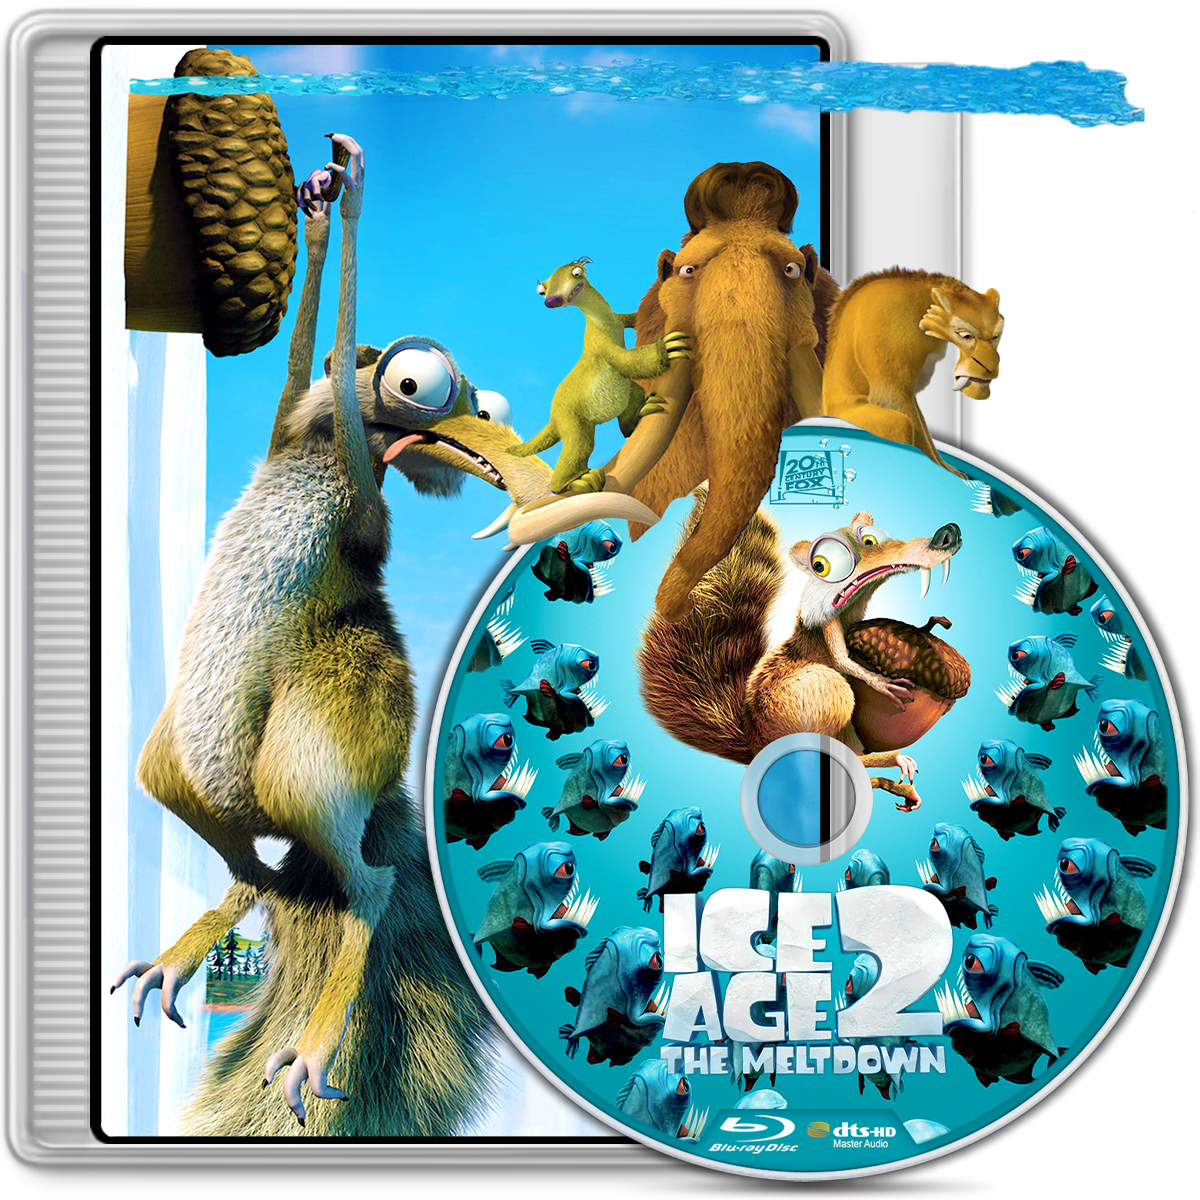 Ice Age 2 The Meltdown (2006) by ber-n-ash on DeviantArt